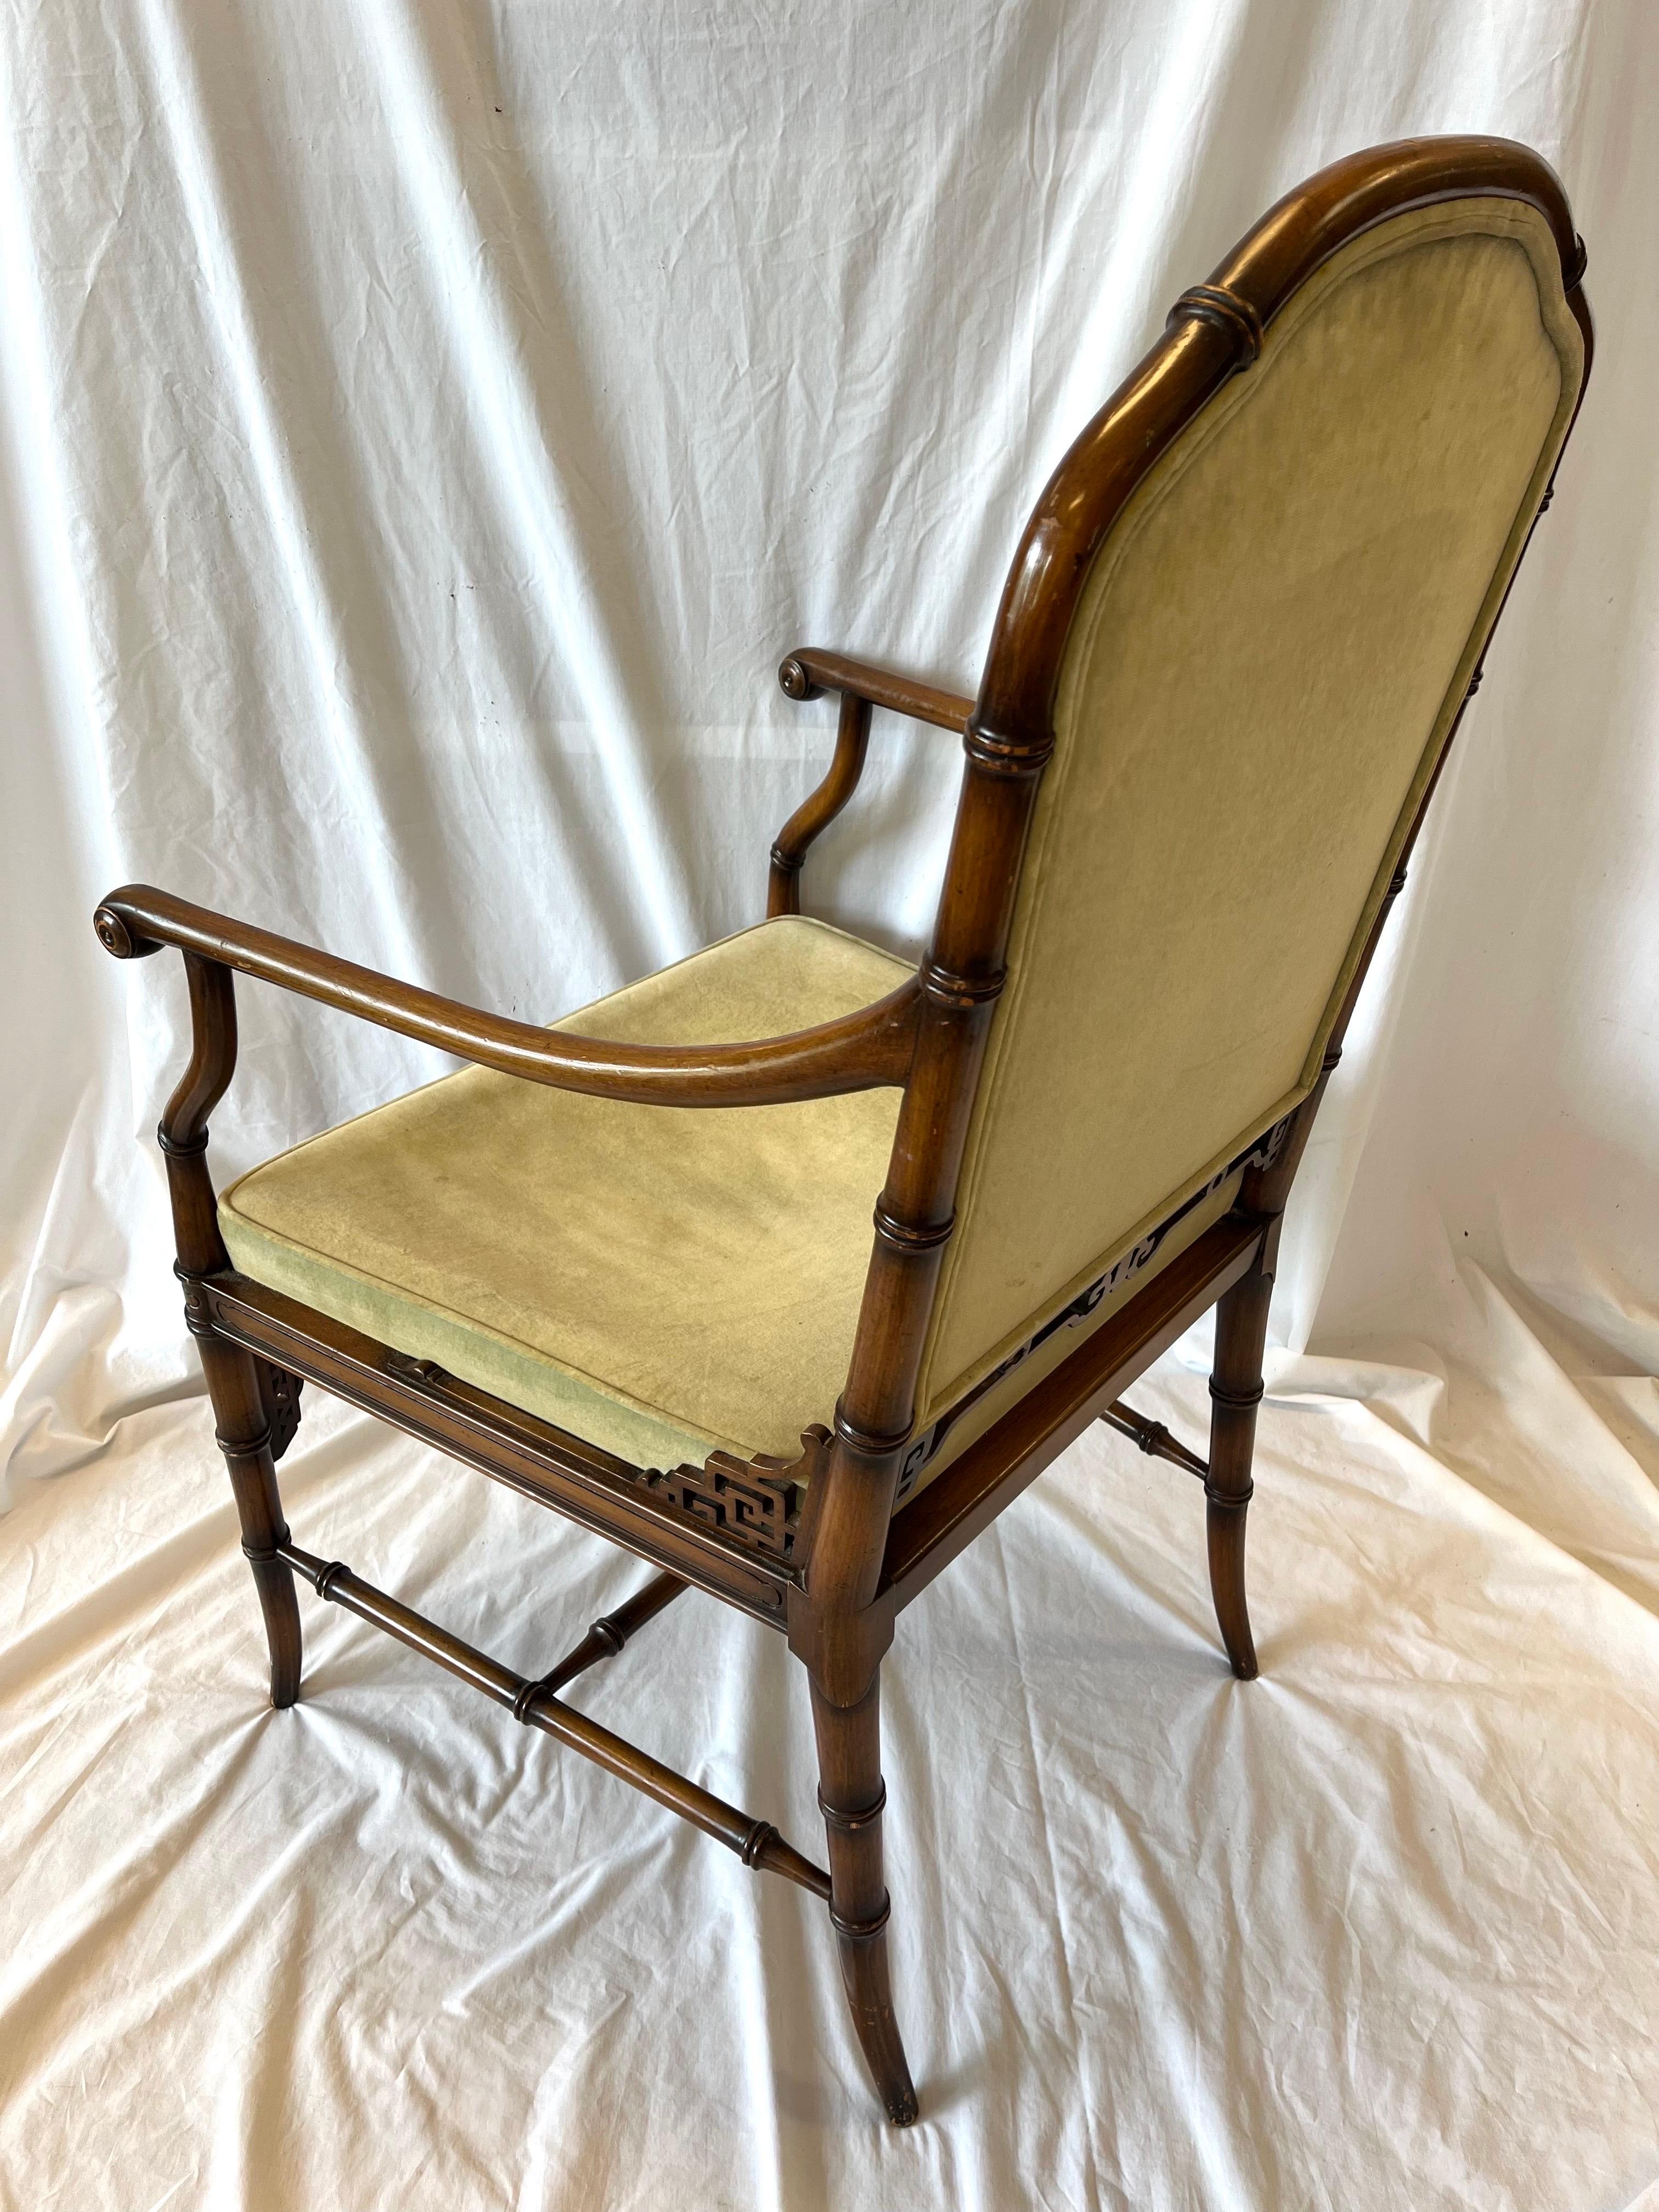 Vintage Faux Bamboo Chinoiserie Style Upholstered Fretwork Armchair Desk Chair 2